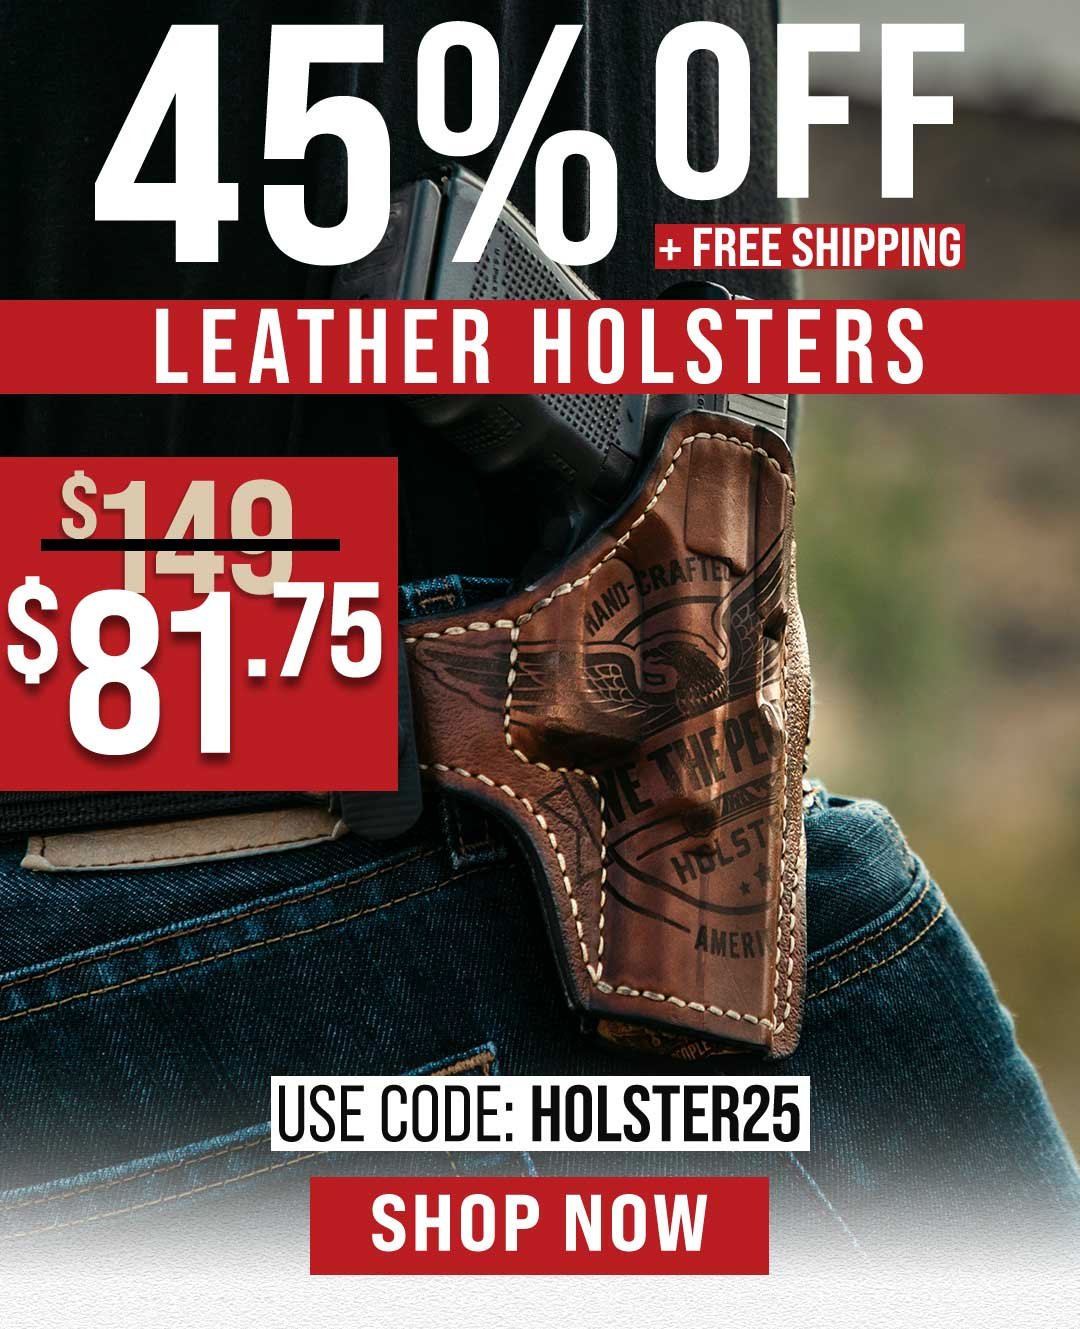 46% OFF Leather Holsters + FREE Shipping